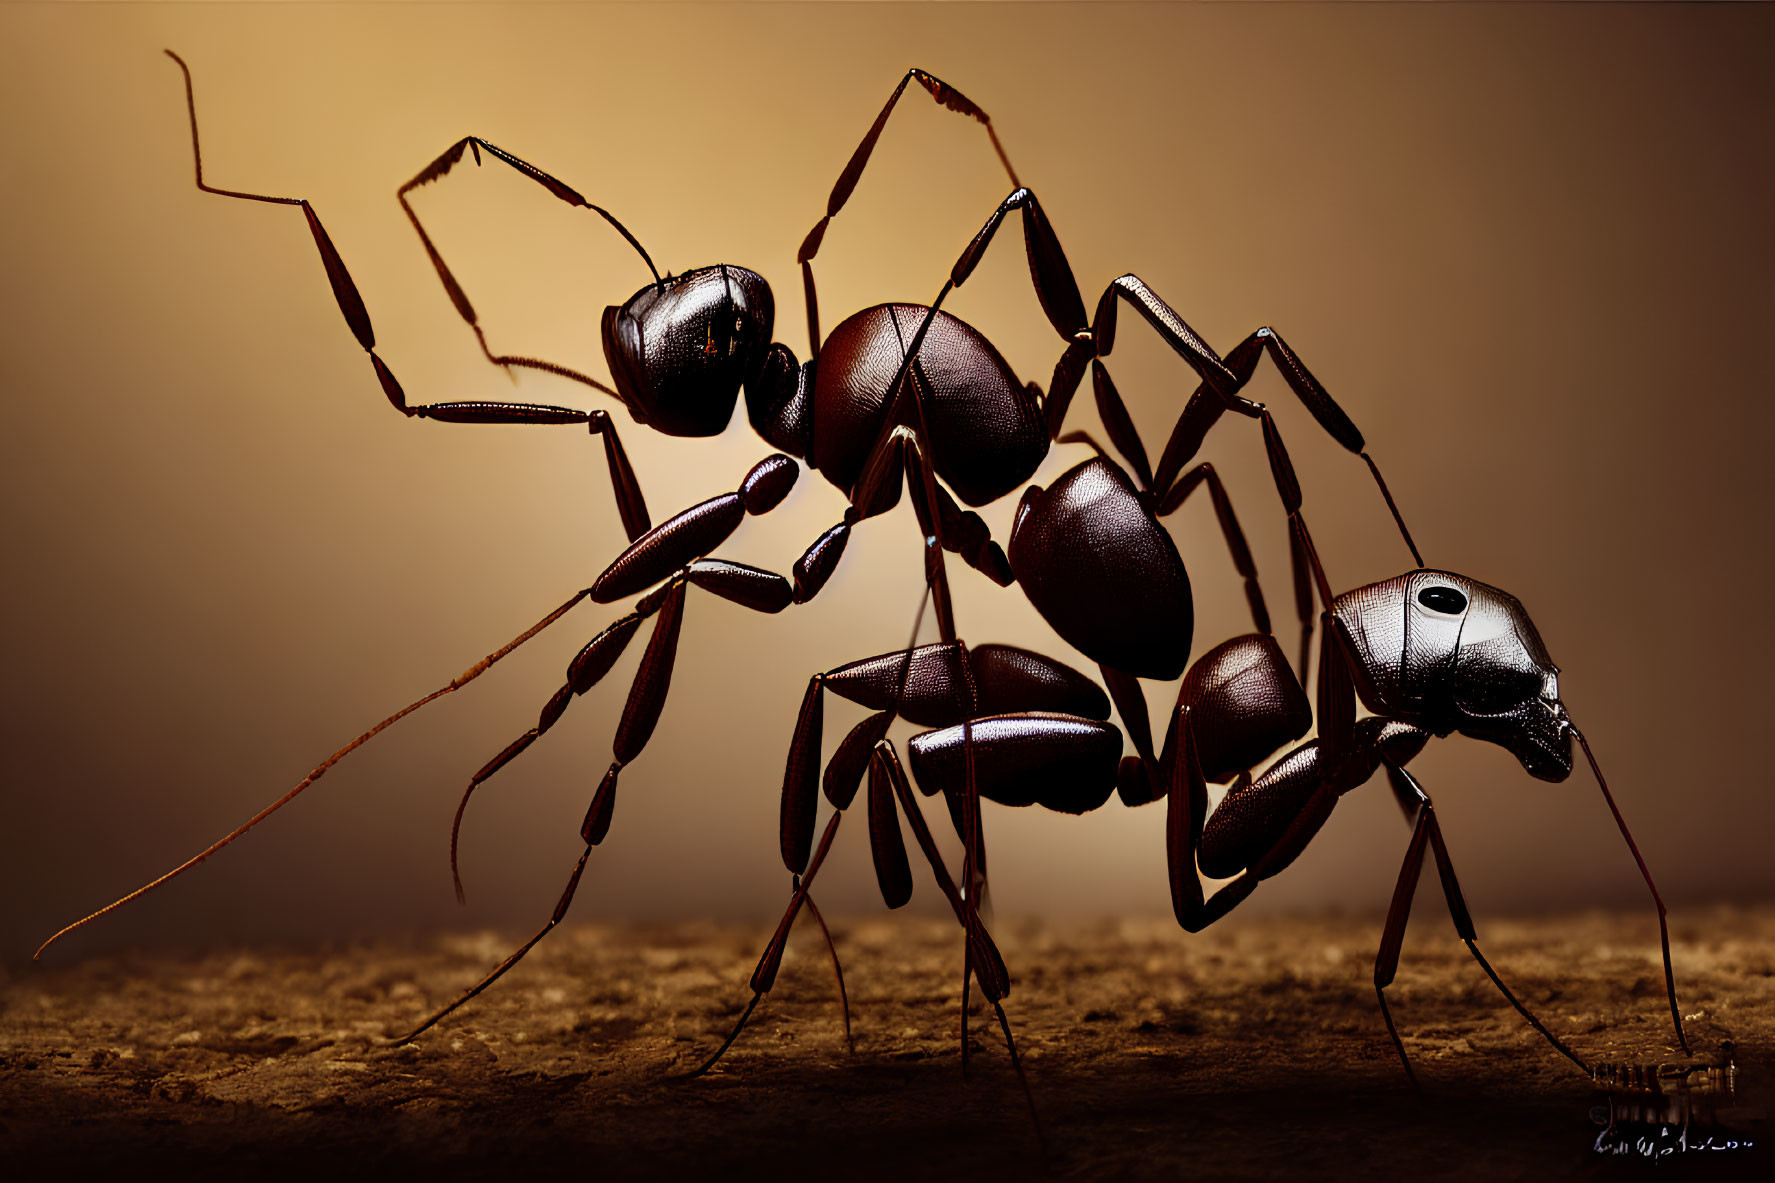 Highly detailed ants with intricate body features on warm background